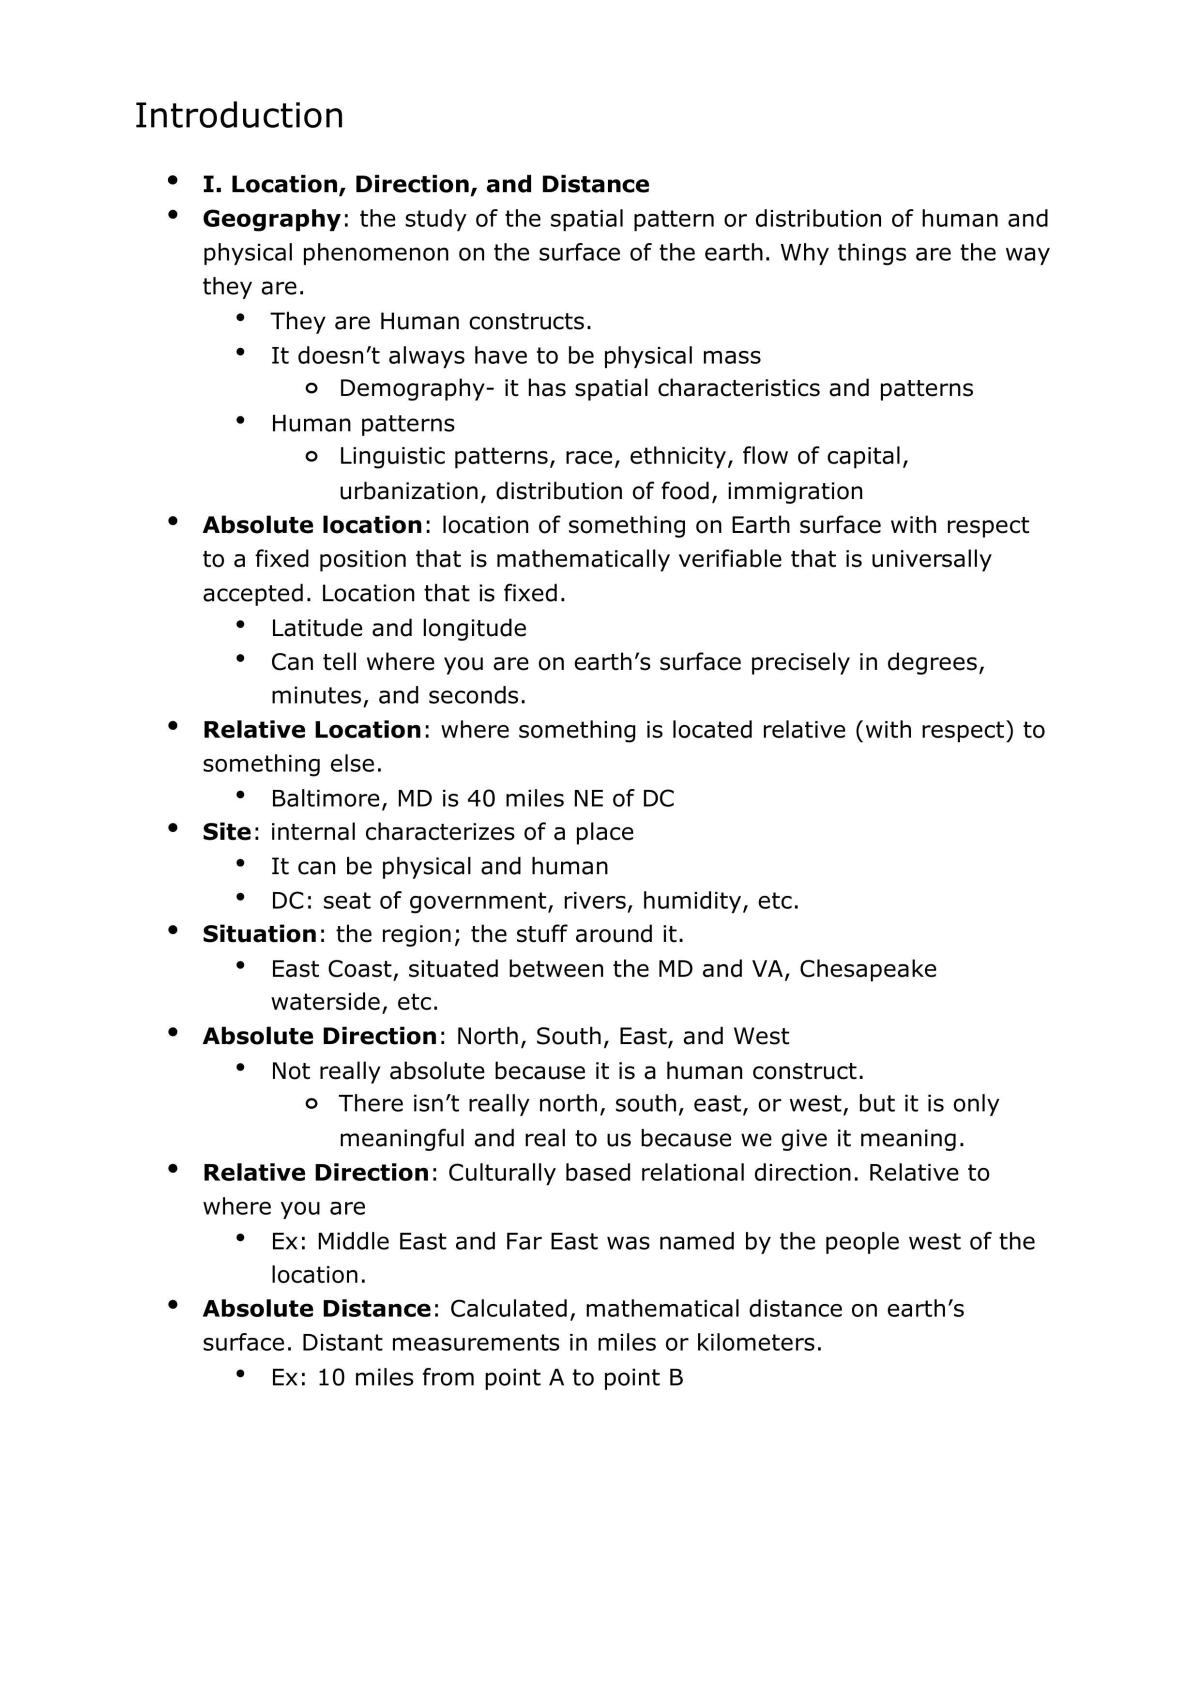 World Regional Geography Notes - Page 1